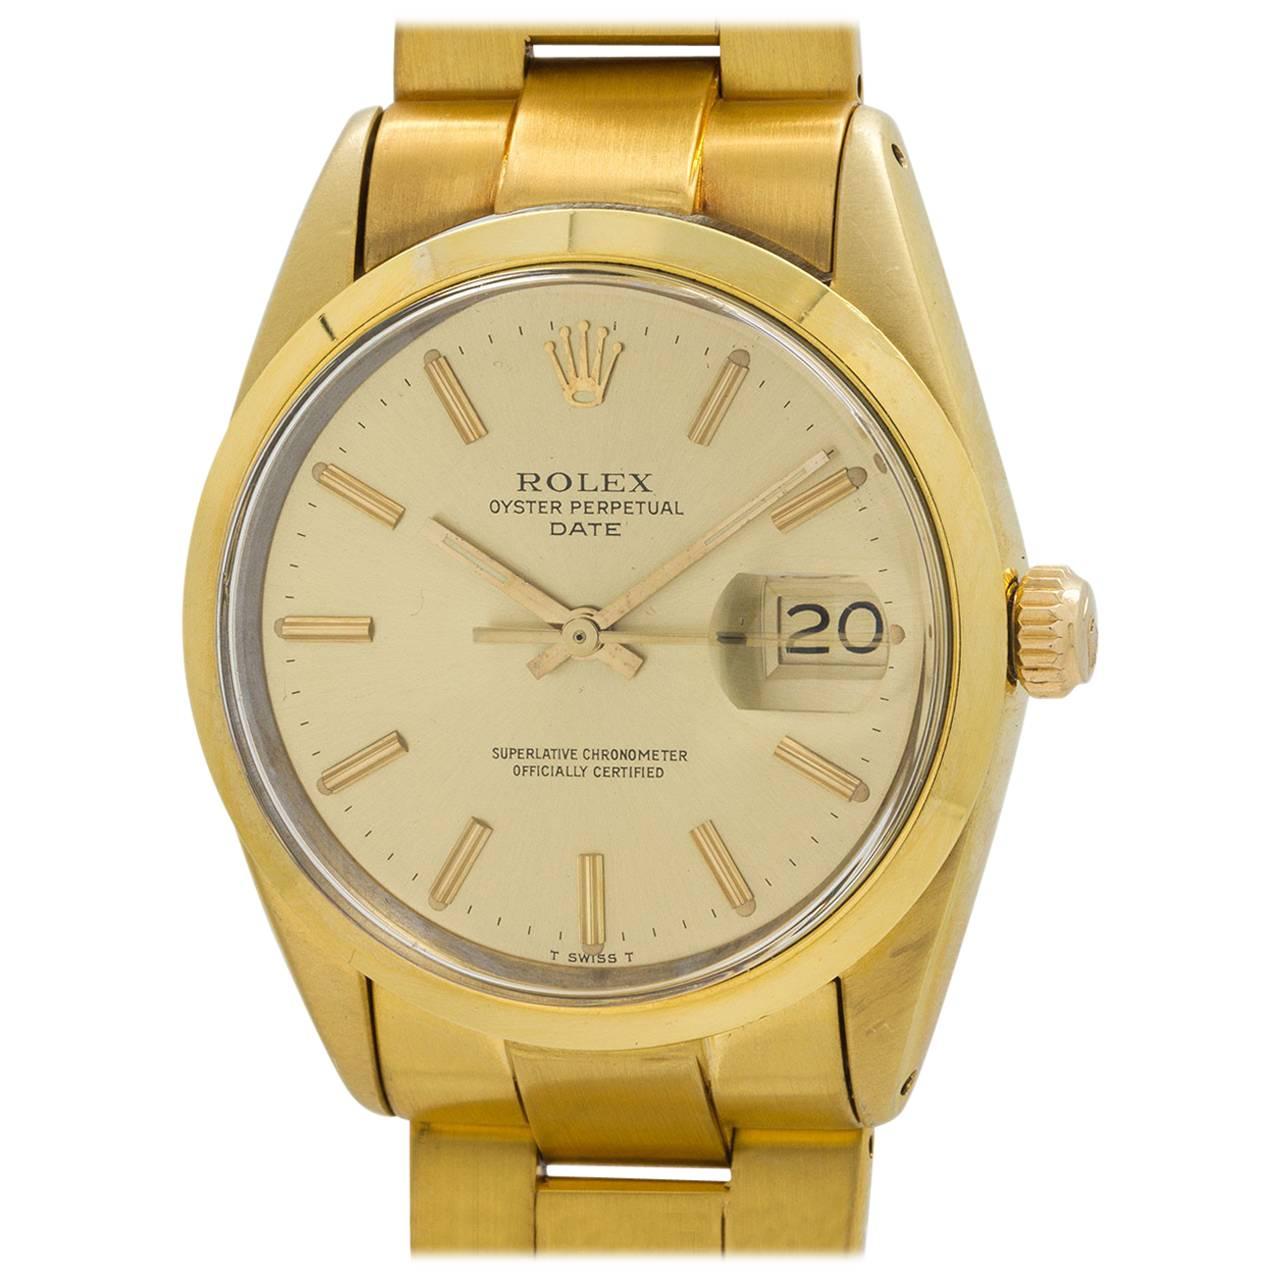 Rolex Gold Shell Oyster Perpetual Date Automatic Wristwatch circa 1979